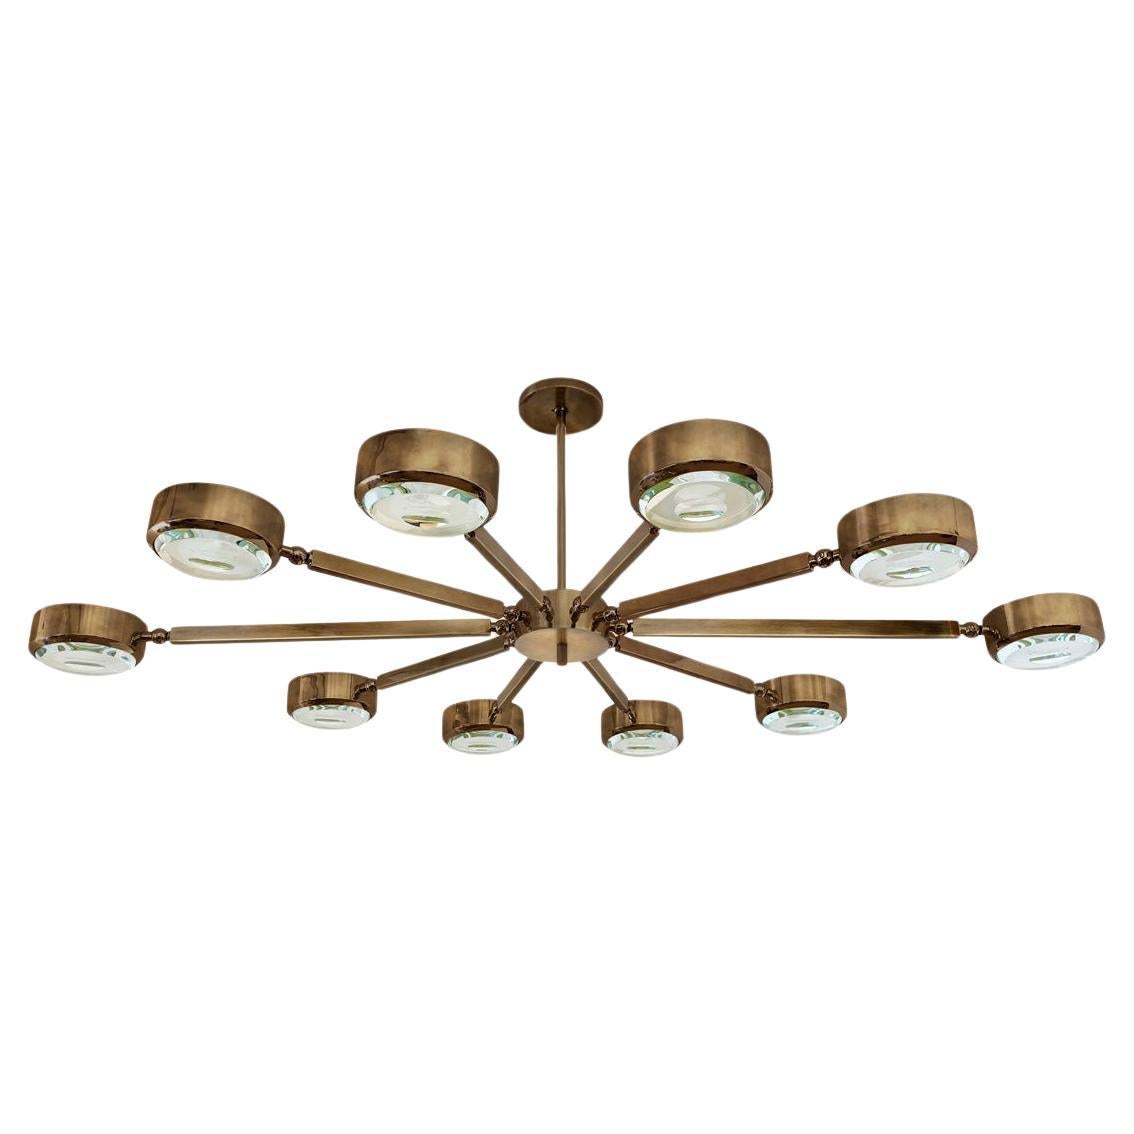 Oculus Oval Ceiling Light by Gaspare Asaro- Bronze Finish with Carved Glass For Sale